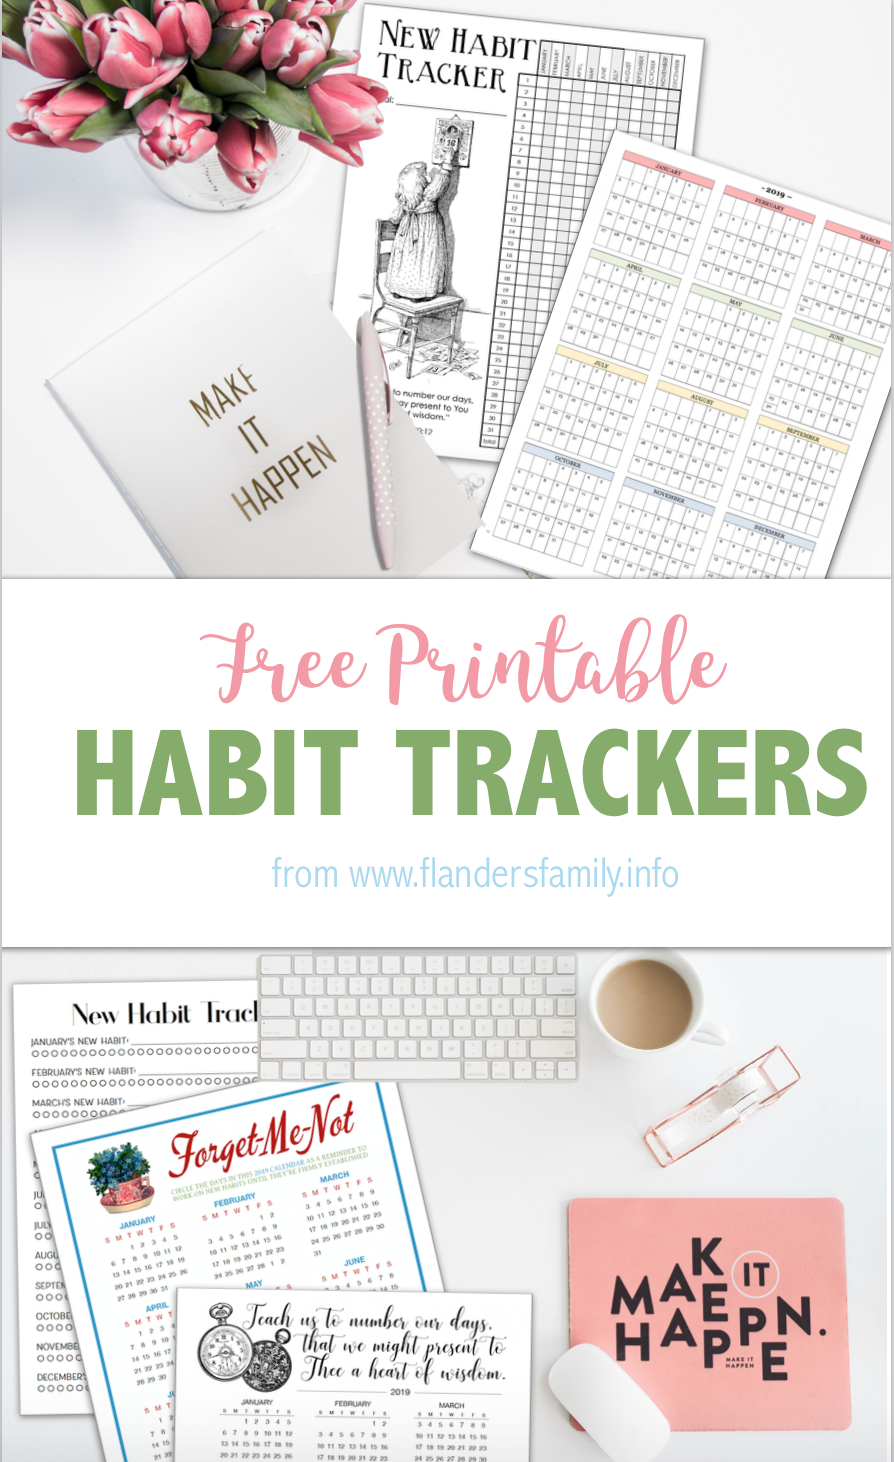 FREE Year-at-a-Glance calendars and habit trackers from flandersfamily.info #goals #freeprintable #newyearsresolutions